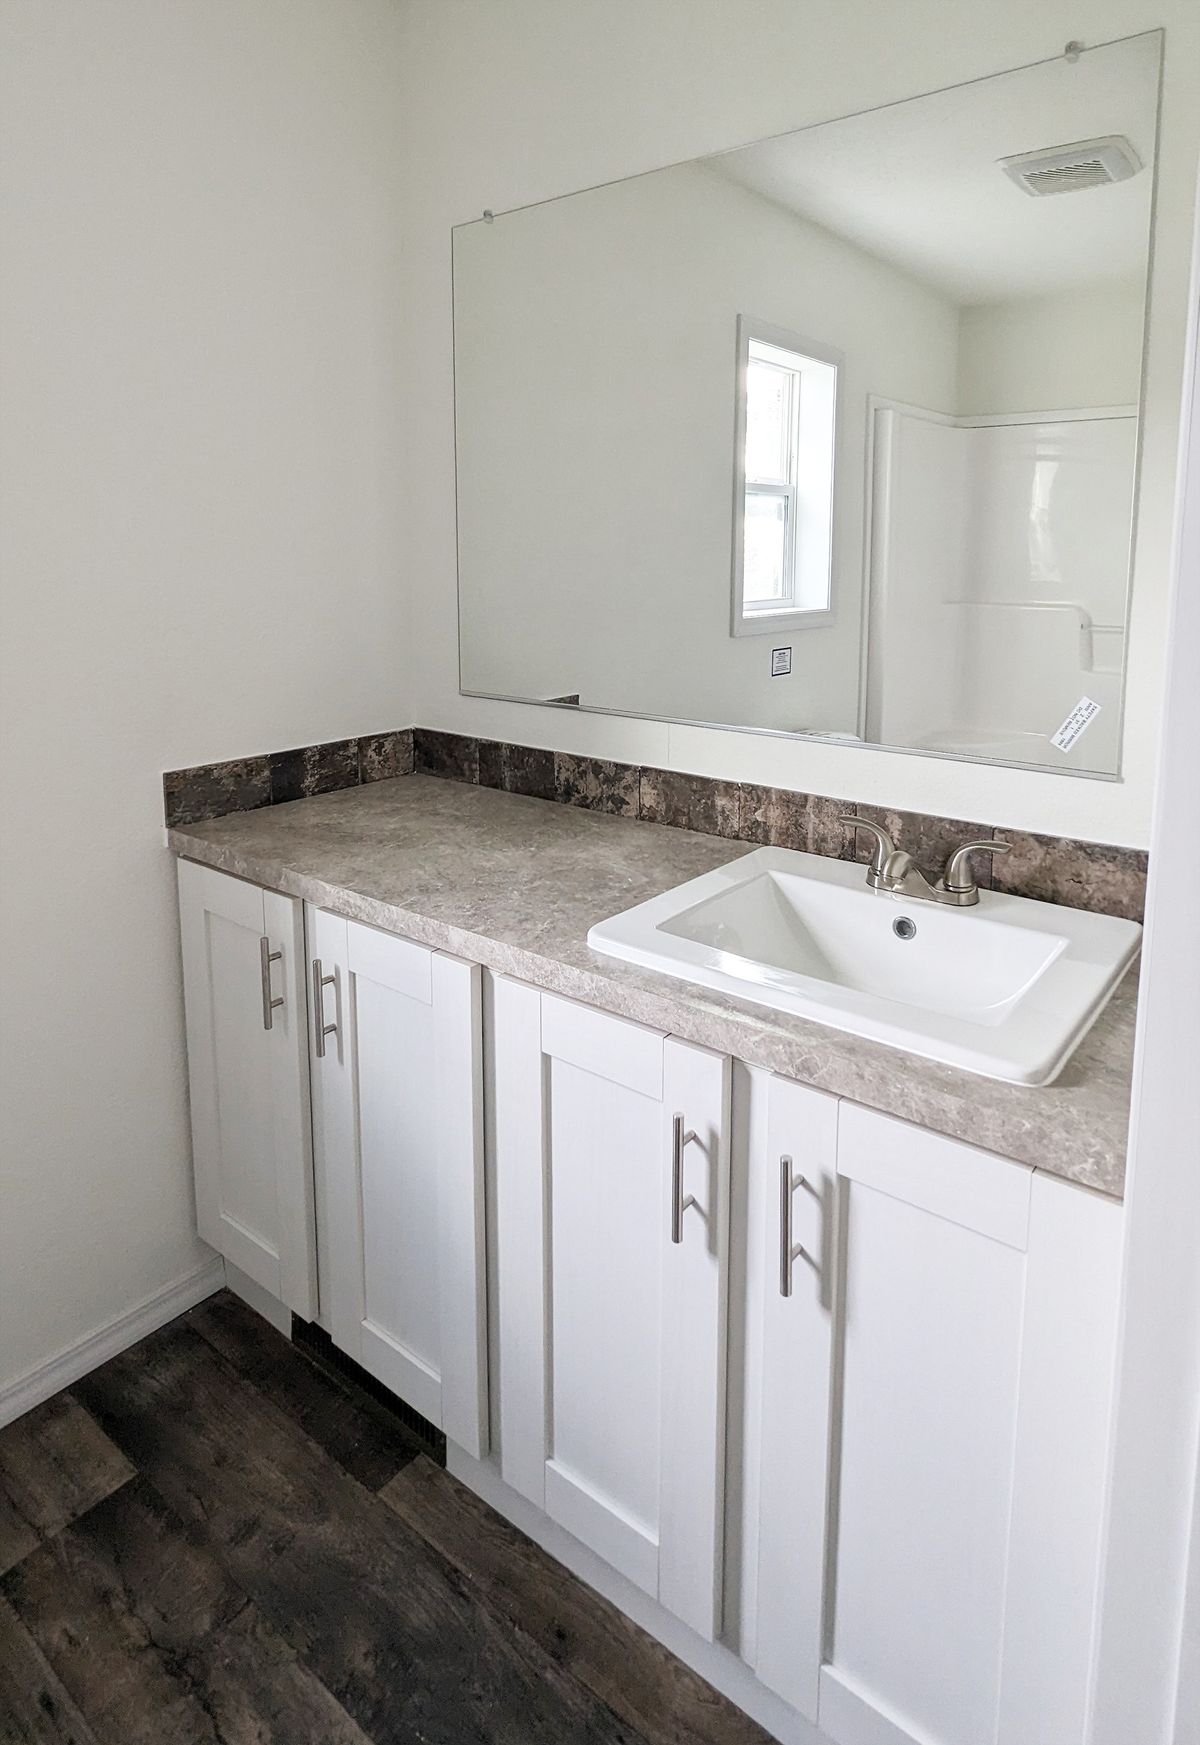 The LIFESTYLE 216-1 Primary Bathroom. This Manufactured Mobile Home features 3 bedrooms and 2 baths.